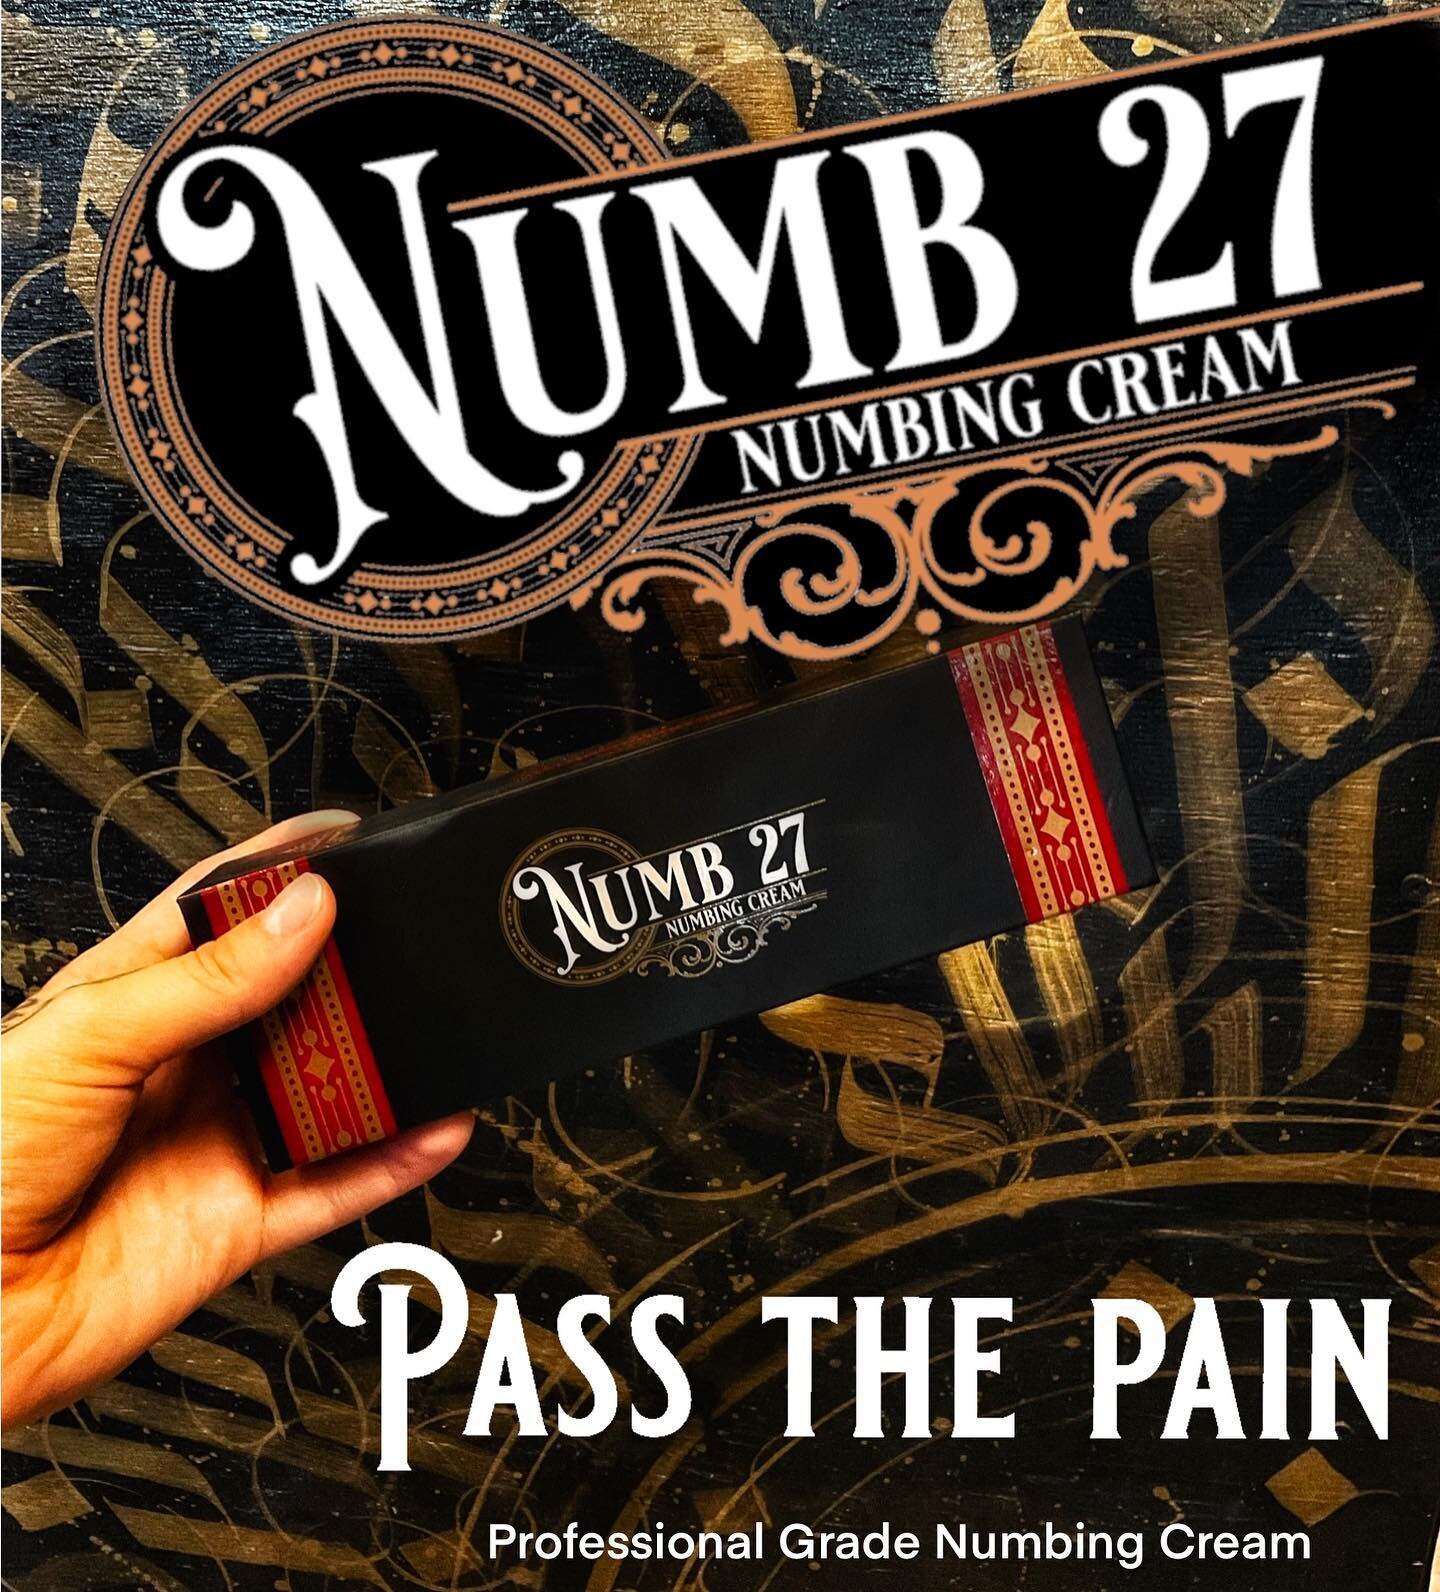 Huge thanks to everyone and all the badass artists who have posted on their pages about their Numb27 Boxes coming in!!!!! 

Been working so hard to spread the word the best way we know how, meeting and working together with real tattooers !!!

Hit us